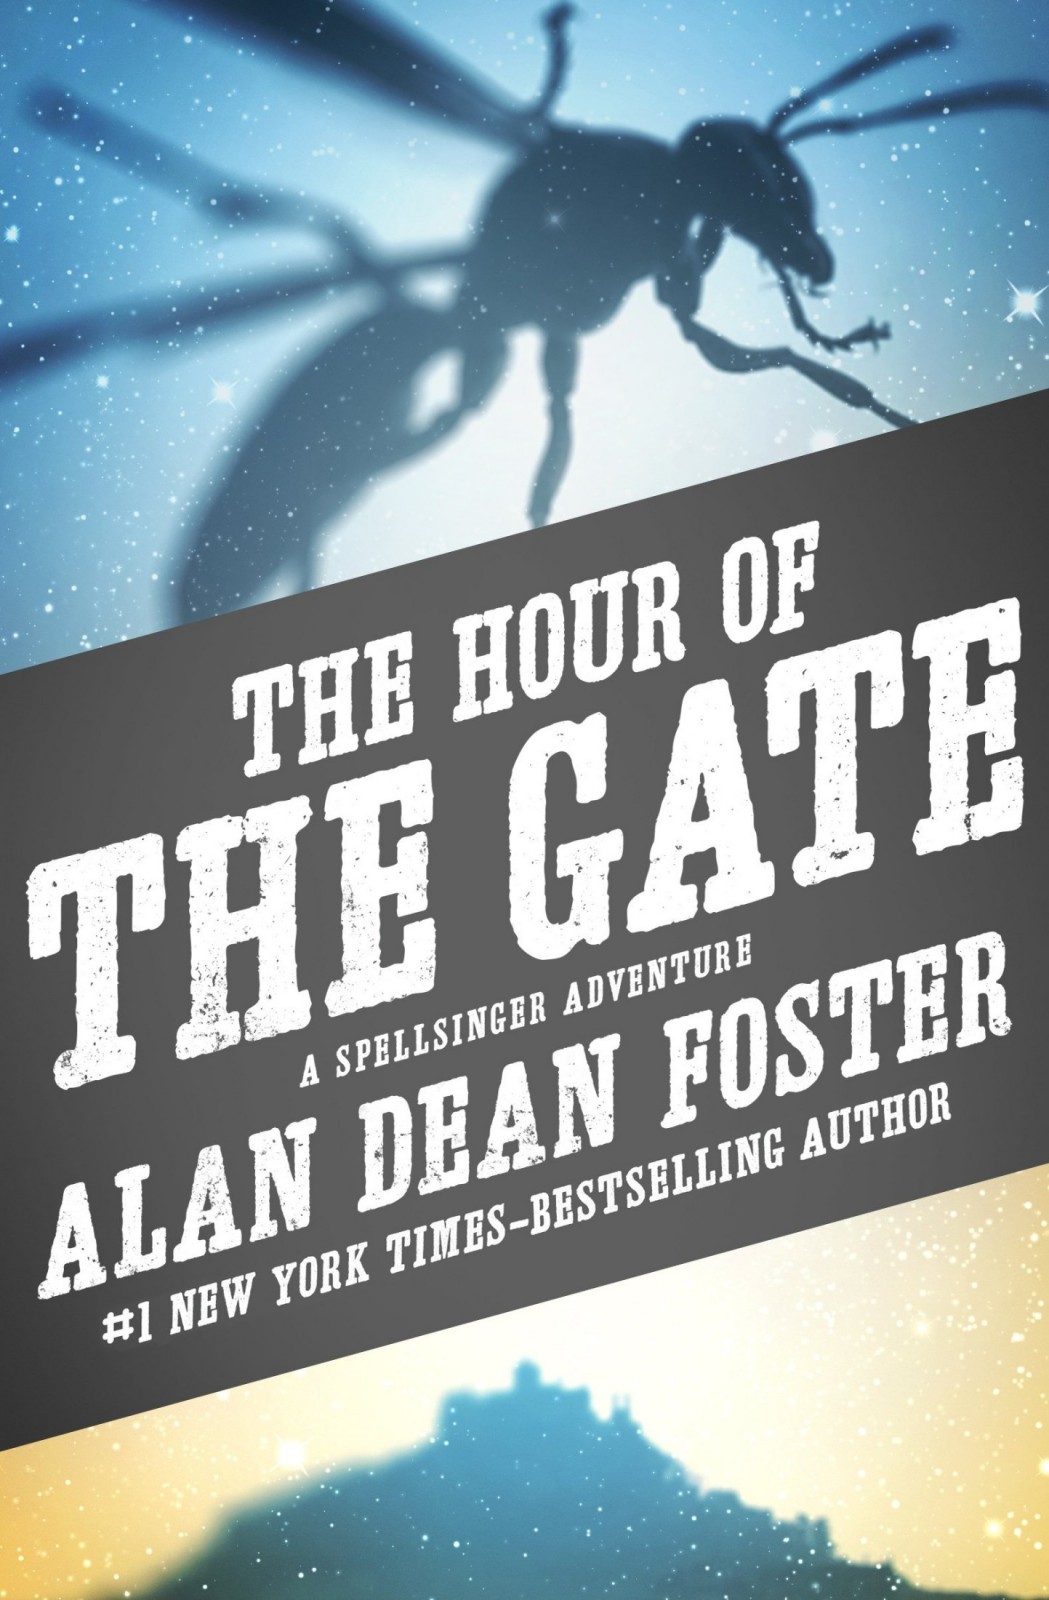 Hour of the Gate